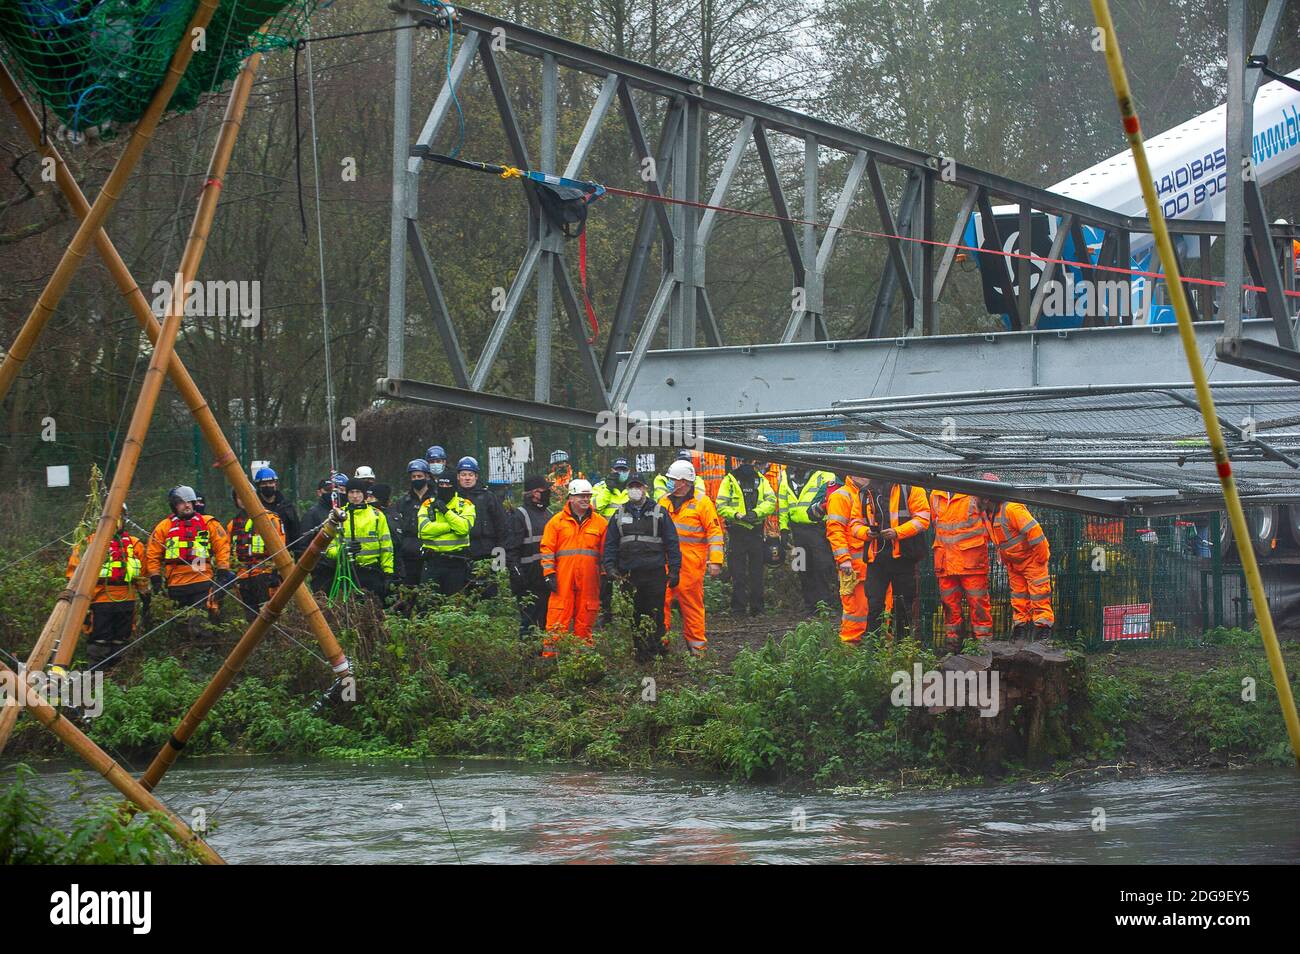 Denham, Buckinghamshire, UK. 8th December, 2020. A huge Police and HS2 operation is underway to try to remove Veteran eco activist Dan Hooper known as Swampy who is currently locked onto a 30 feet tall high  bamboo structure in the River Colne in Denham Country Park. HS2 are building a temporary bridge across the river and Anti HS2 Rebellion activists are are trying to stop the bridge being built and further trees being destroyed by HS2 for the controversial High Speed Rail link. Credit: Maureen McLean/Alamy Live News Stock Photo